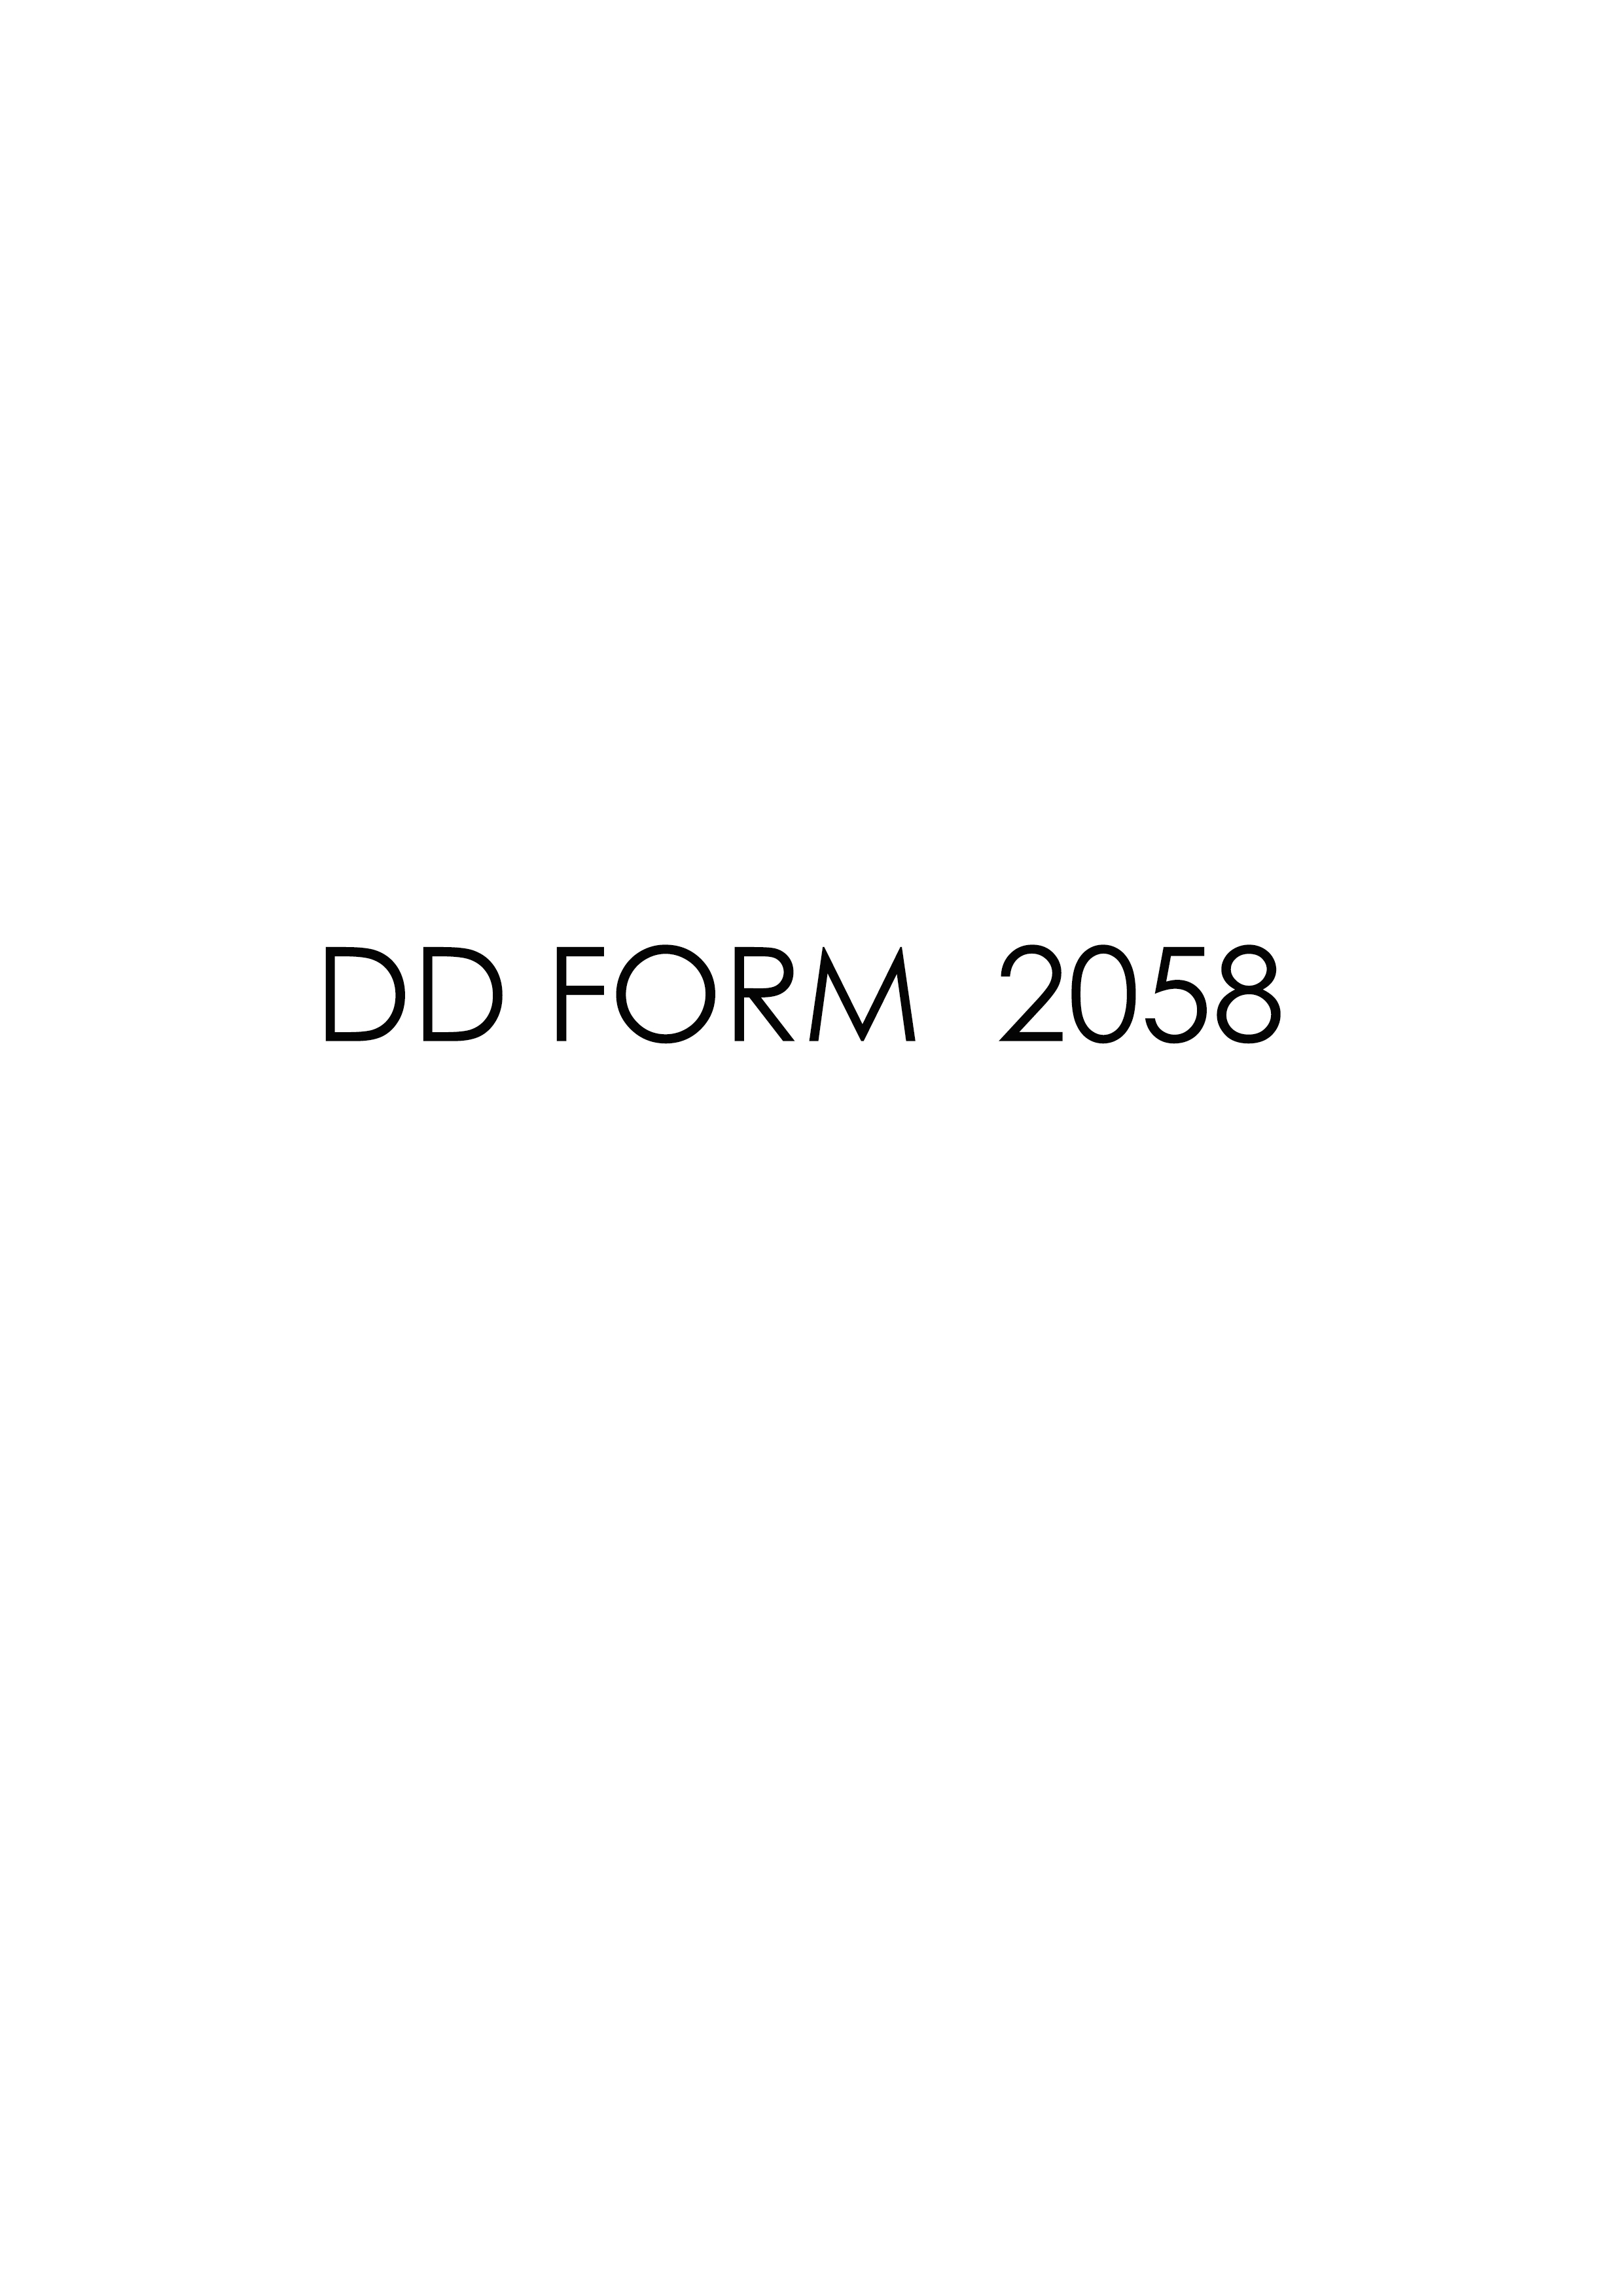 Download Fillable dd Form 2058